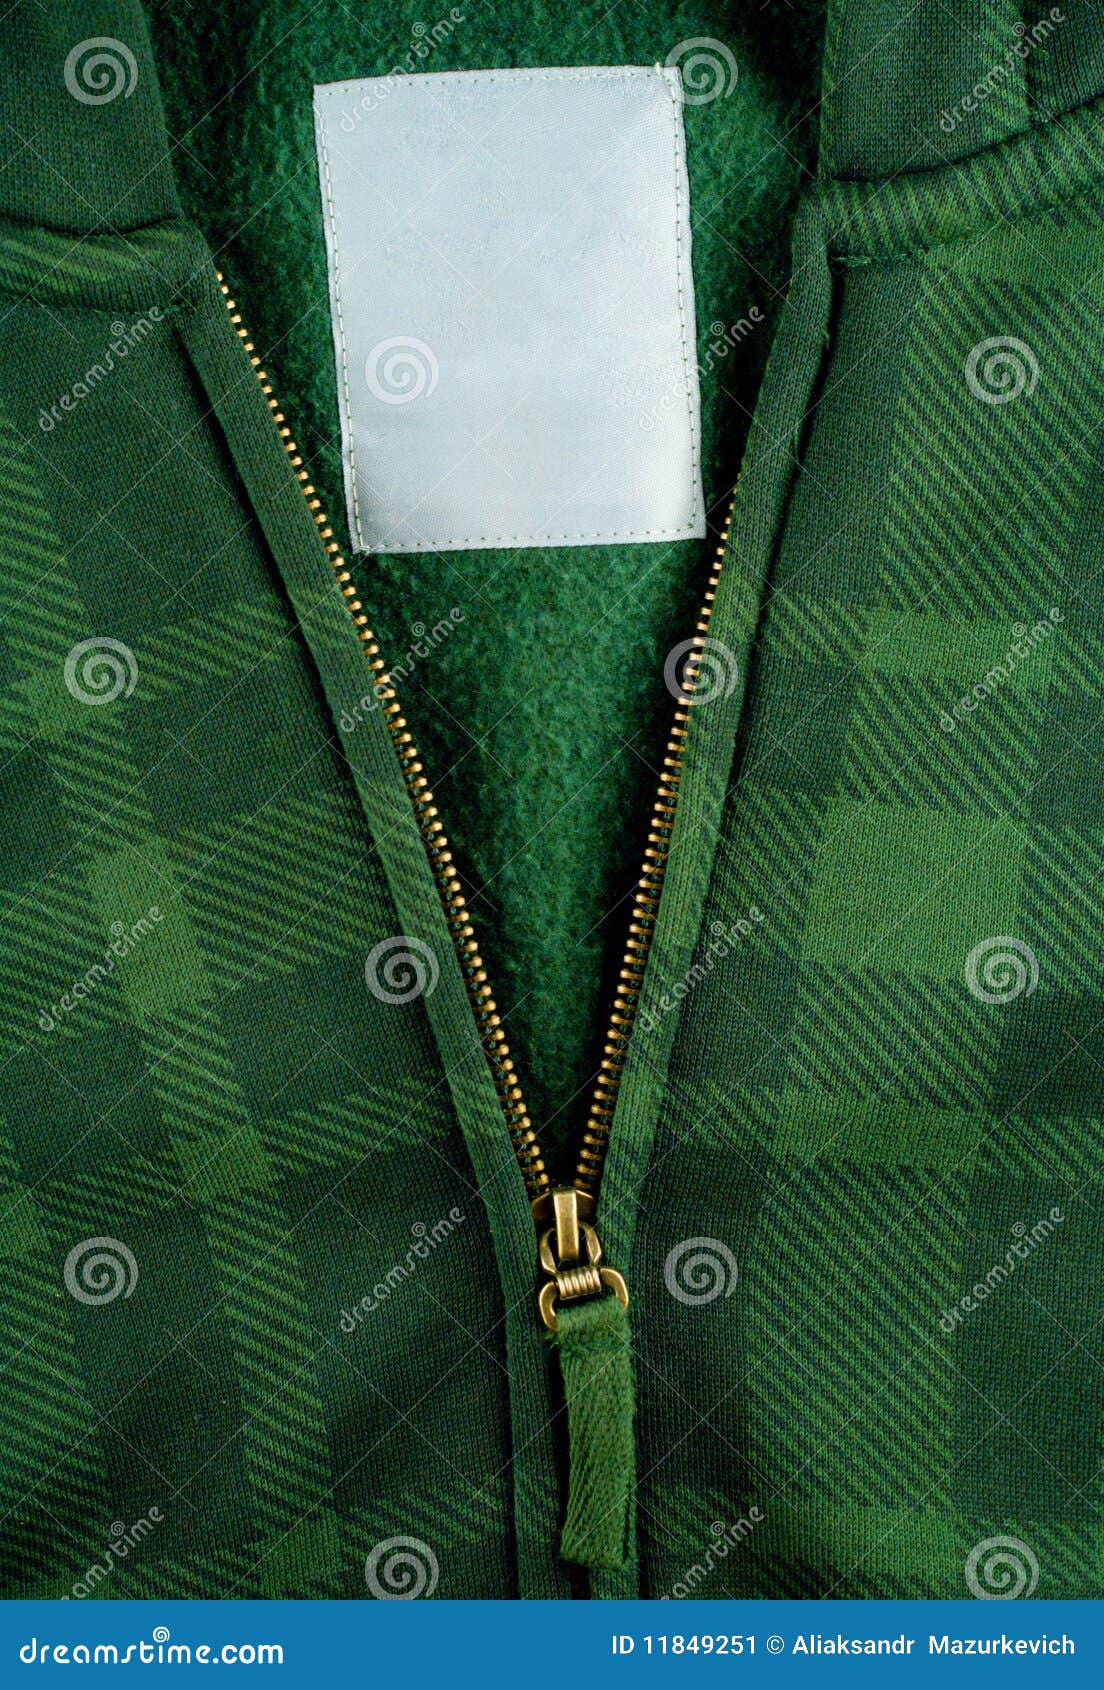 Collar with blank label stock image. Image of paper, checkered - 11849251